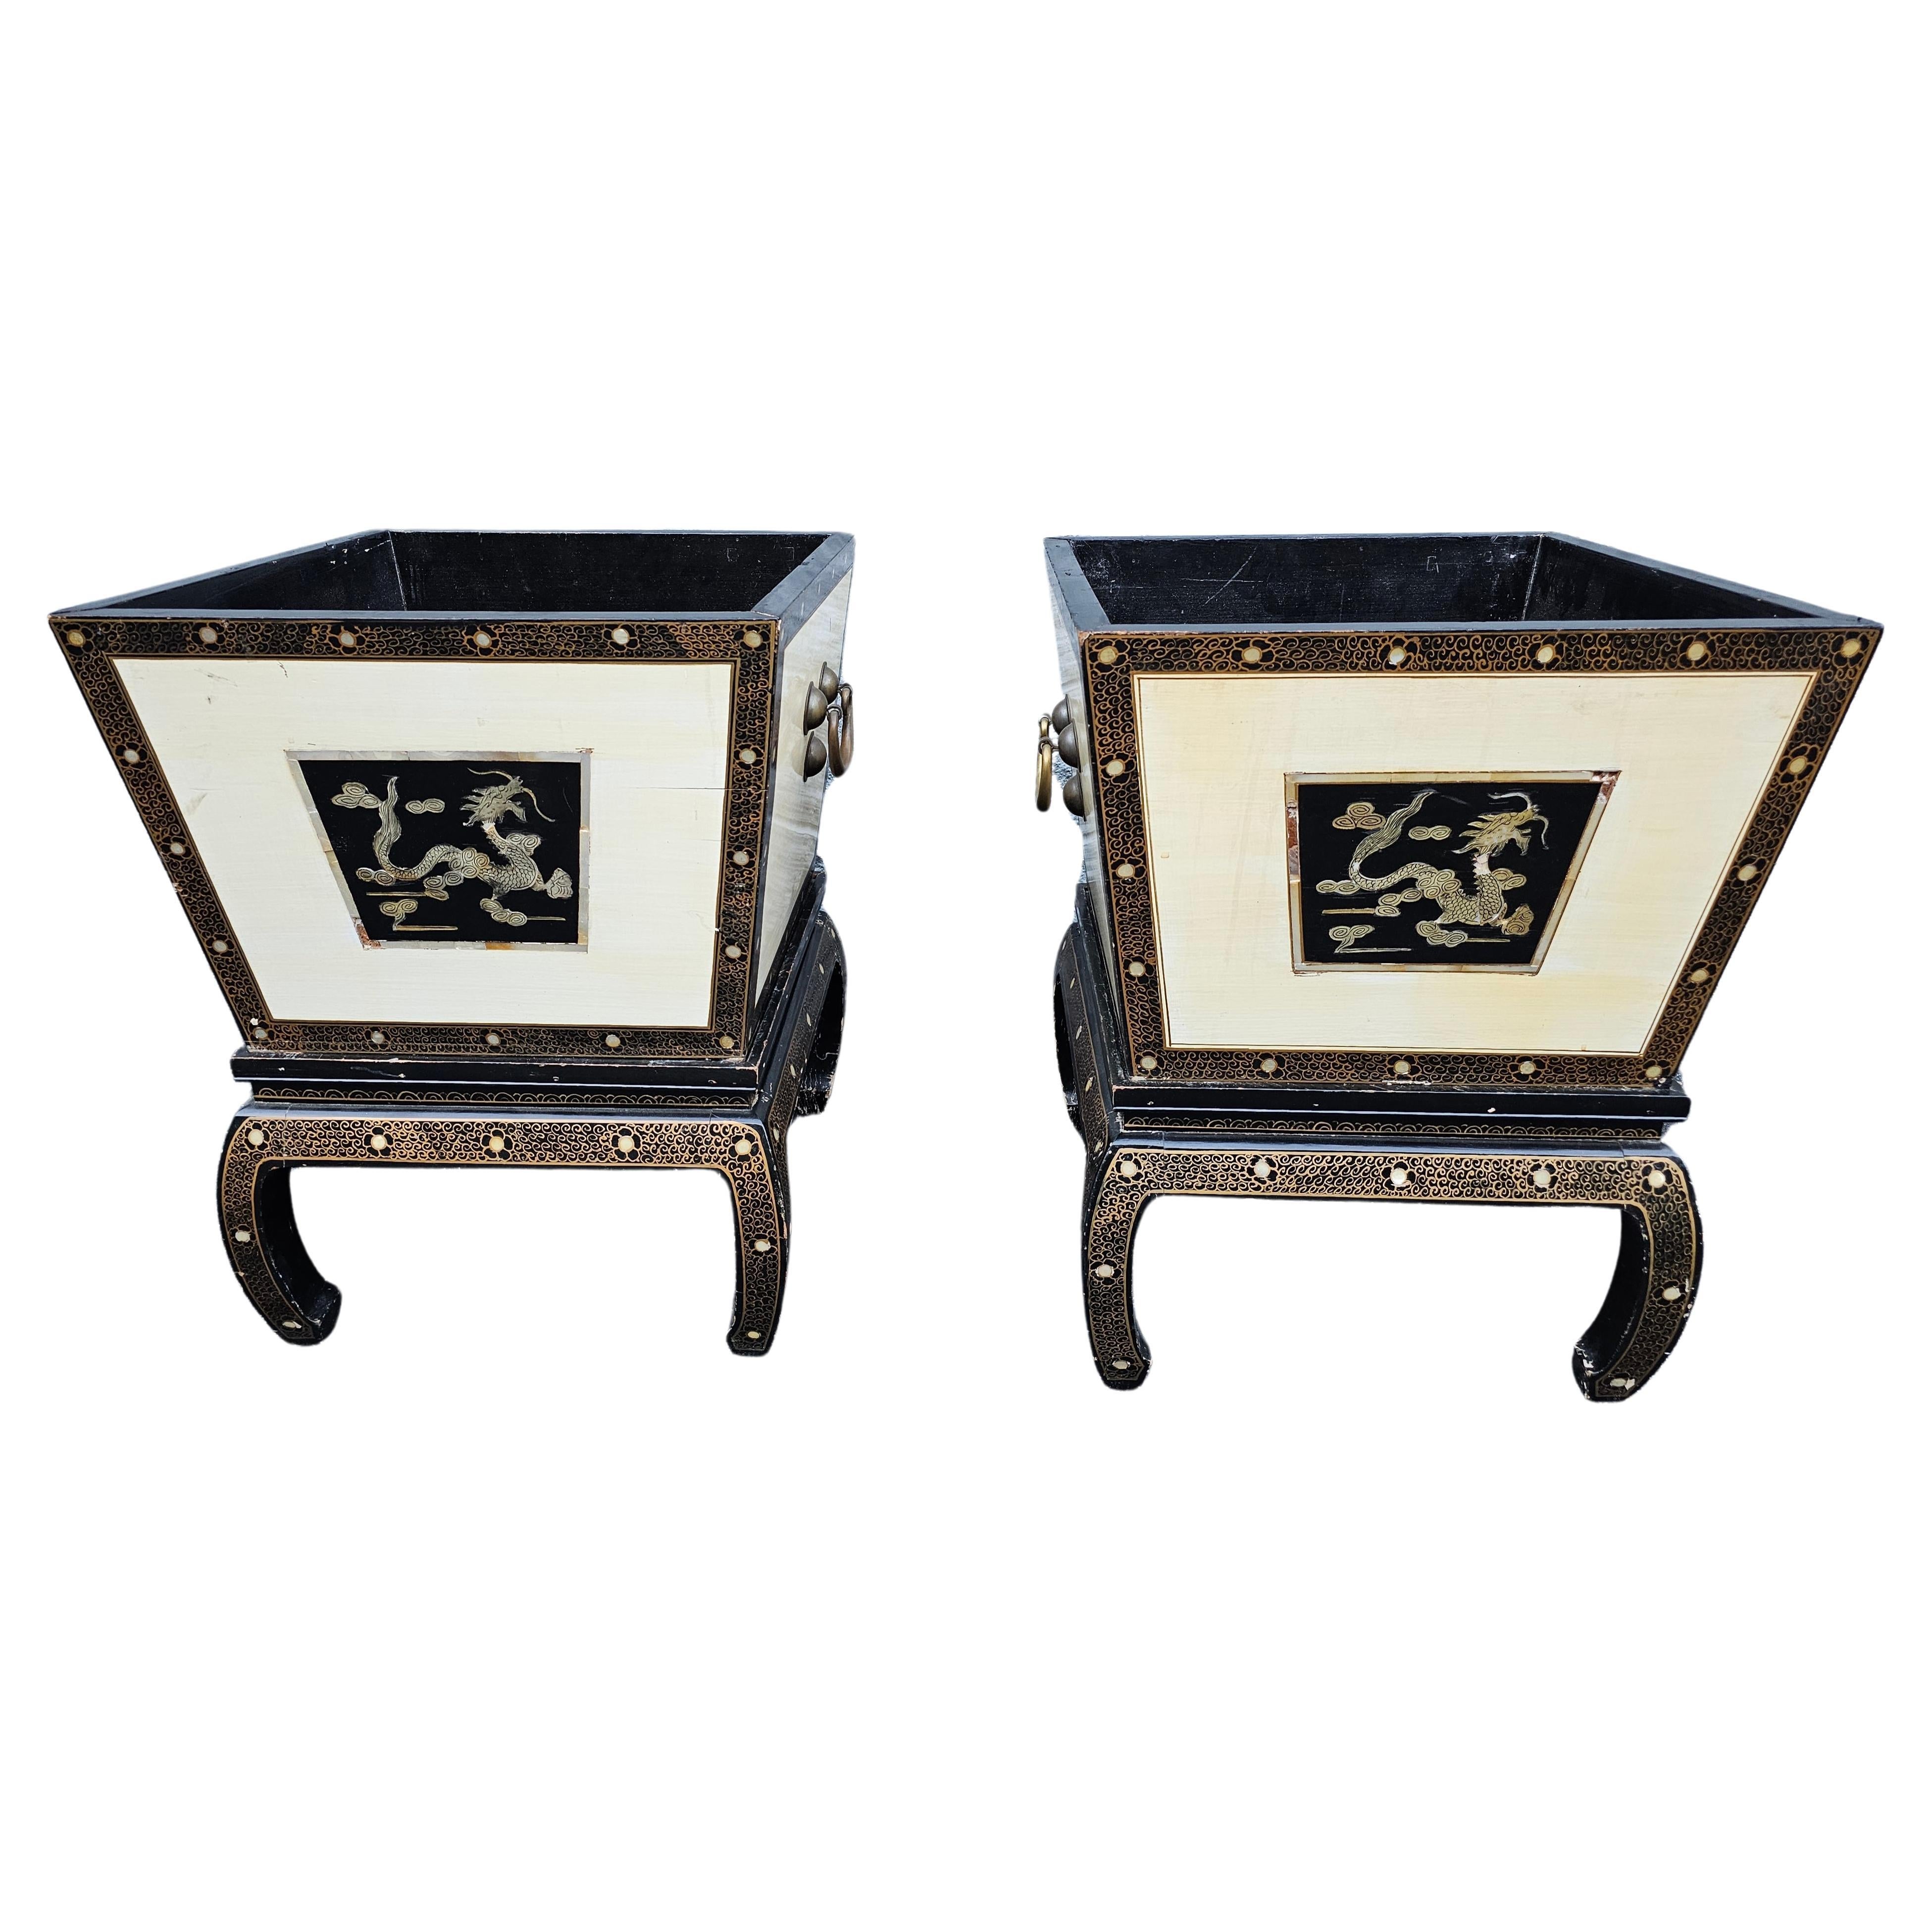 Pair Of Chinese Lacquered And Dragon Decorated Jardinières On Stands For Sale